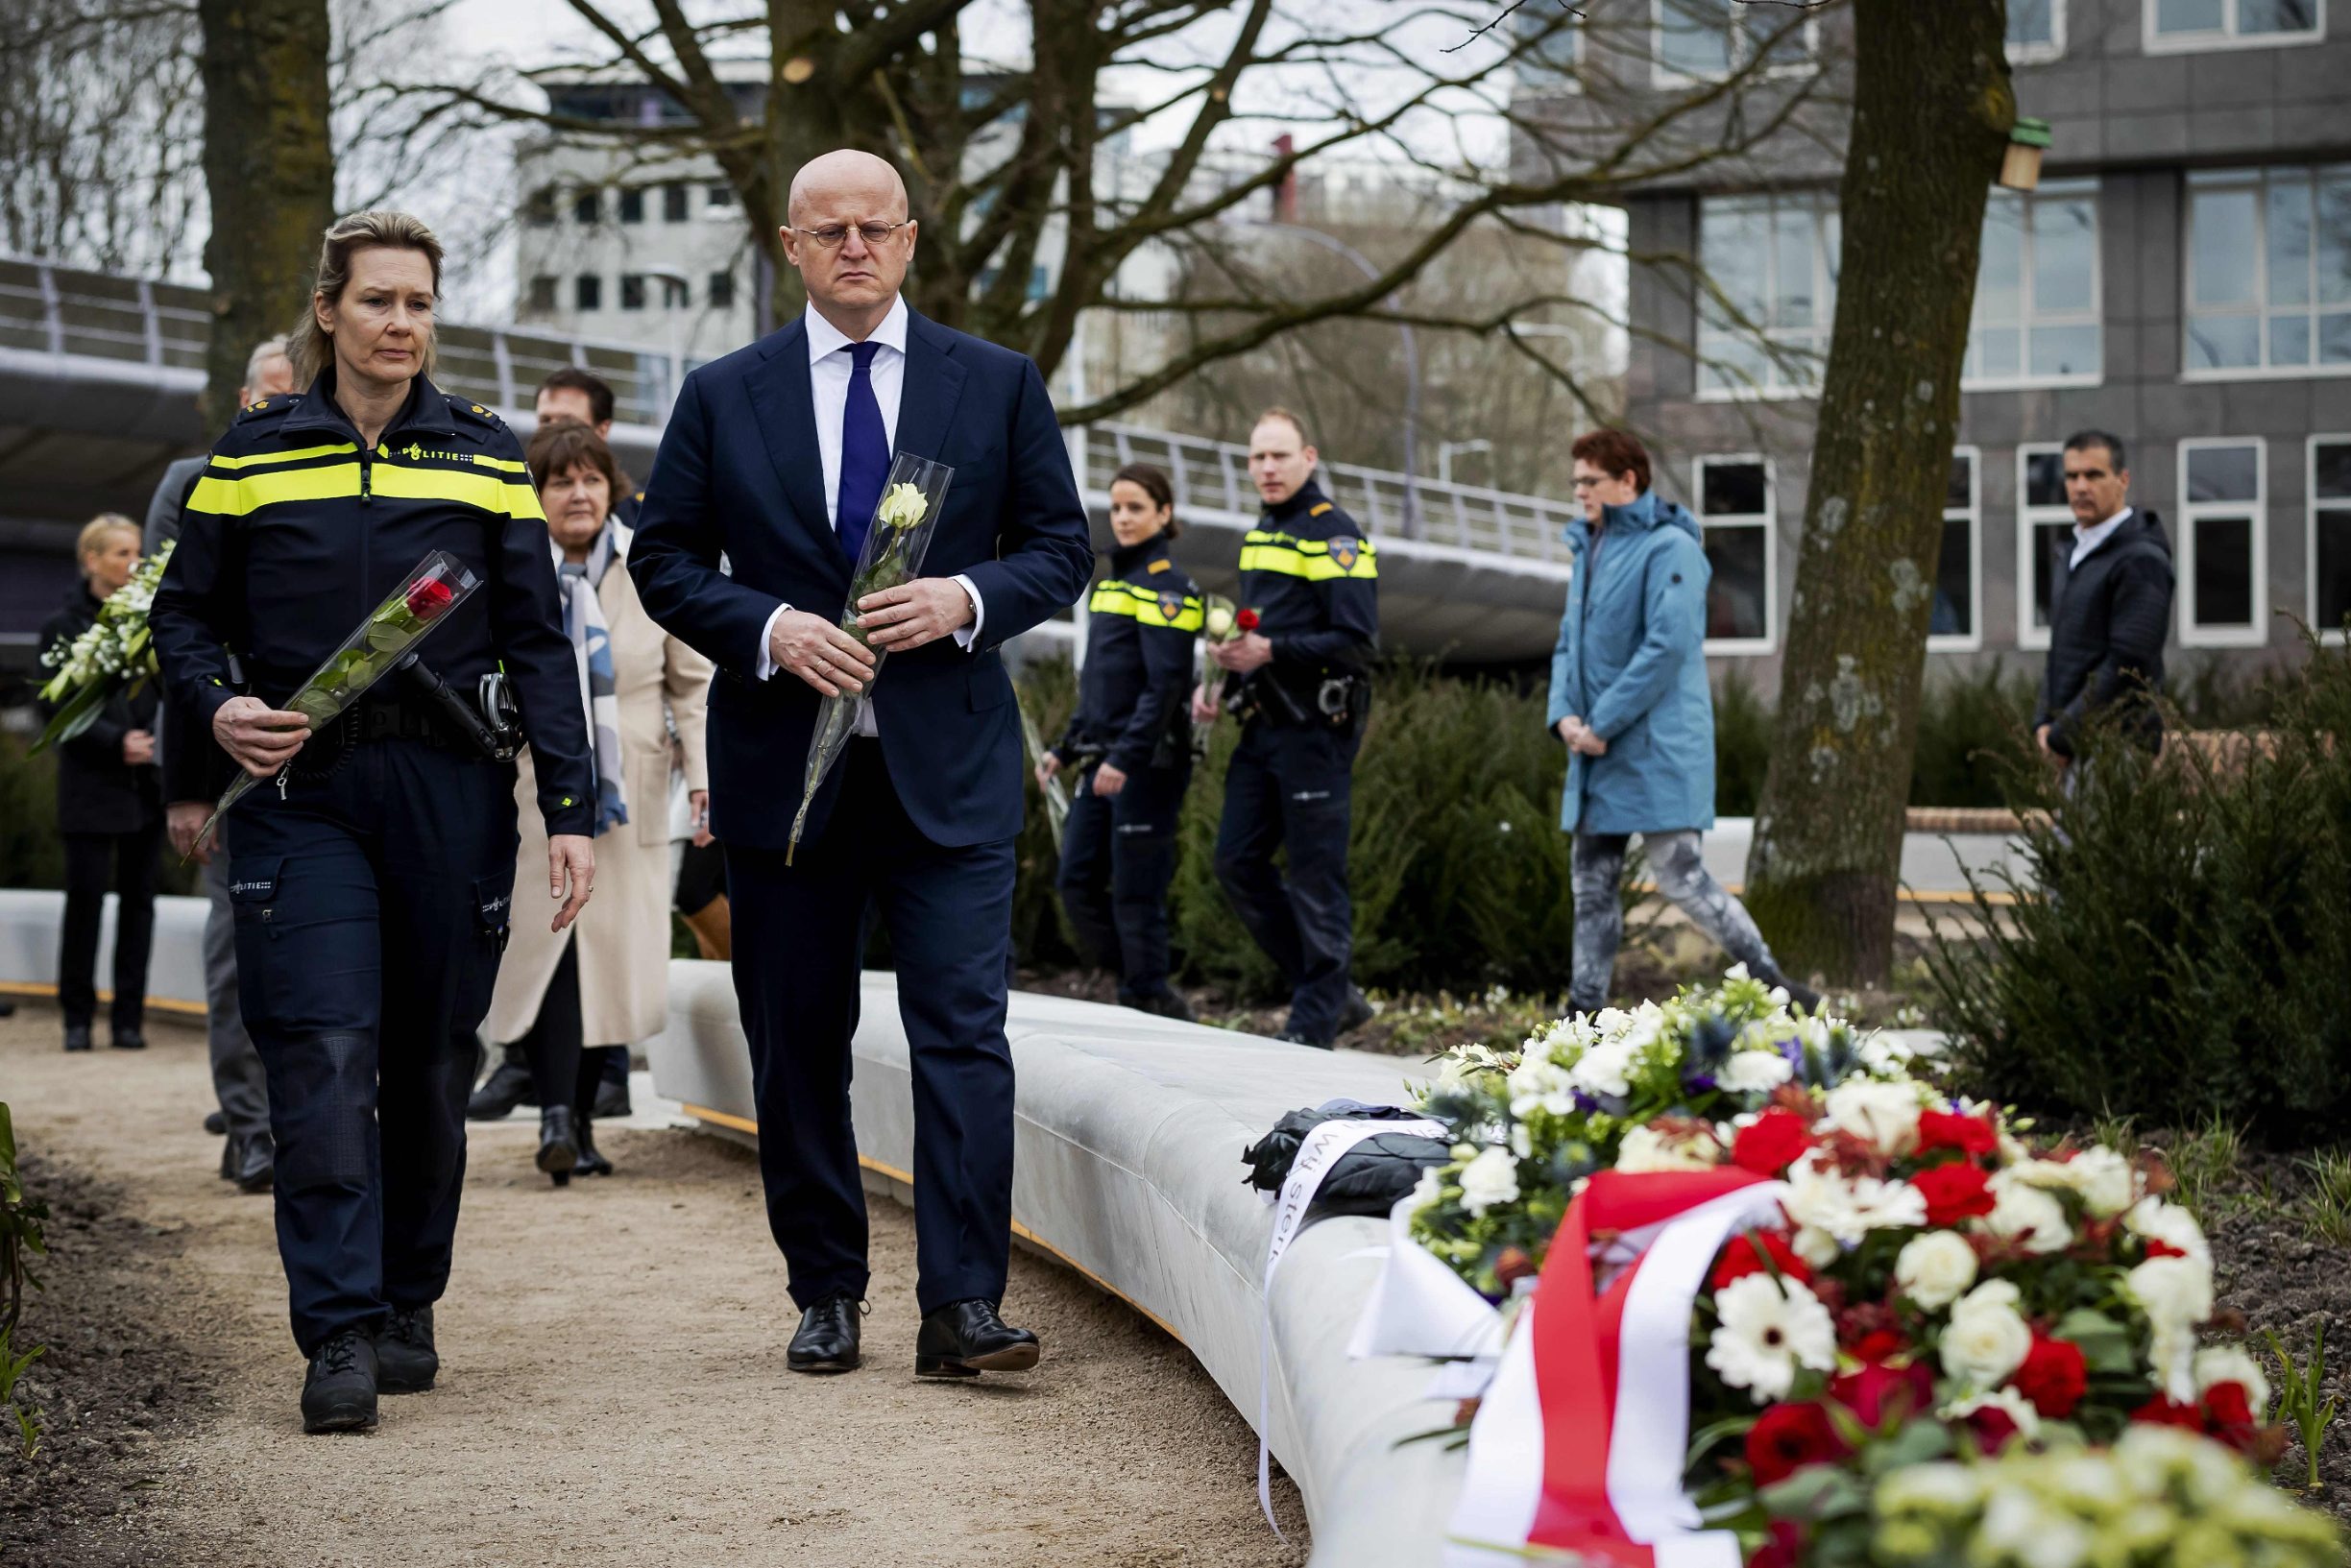 Dutch Minister of Justice and Security Ferdinand Grapperhaus (R) arrives  to pay a tribute at the 24th October Square in Utrecht, on March 18, 2020, a year after a tram attack which killed four people took place. (Photo by Robin VAN LONKHUIJSEN / ANP / AFP) / Netherlands OUT